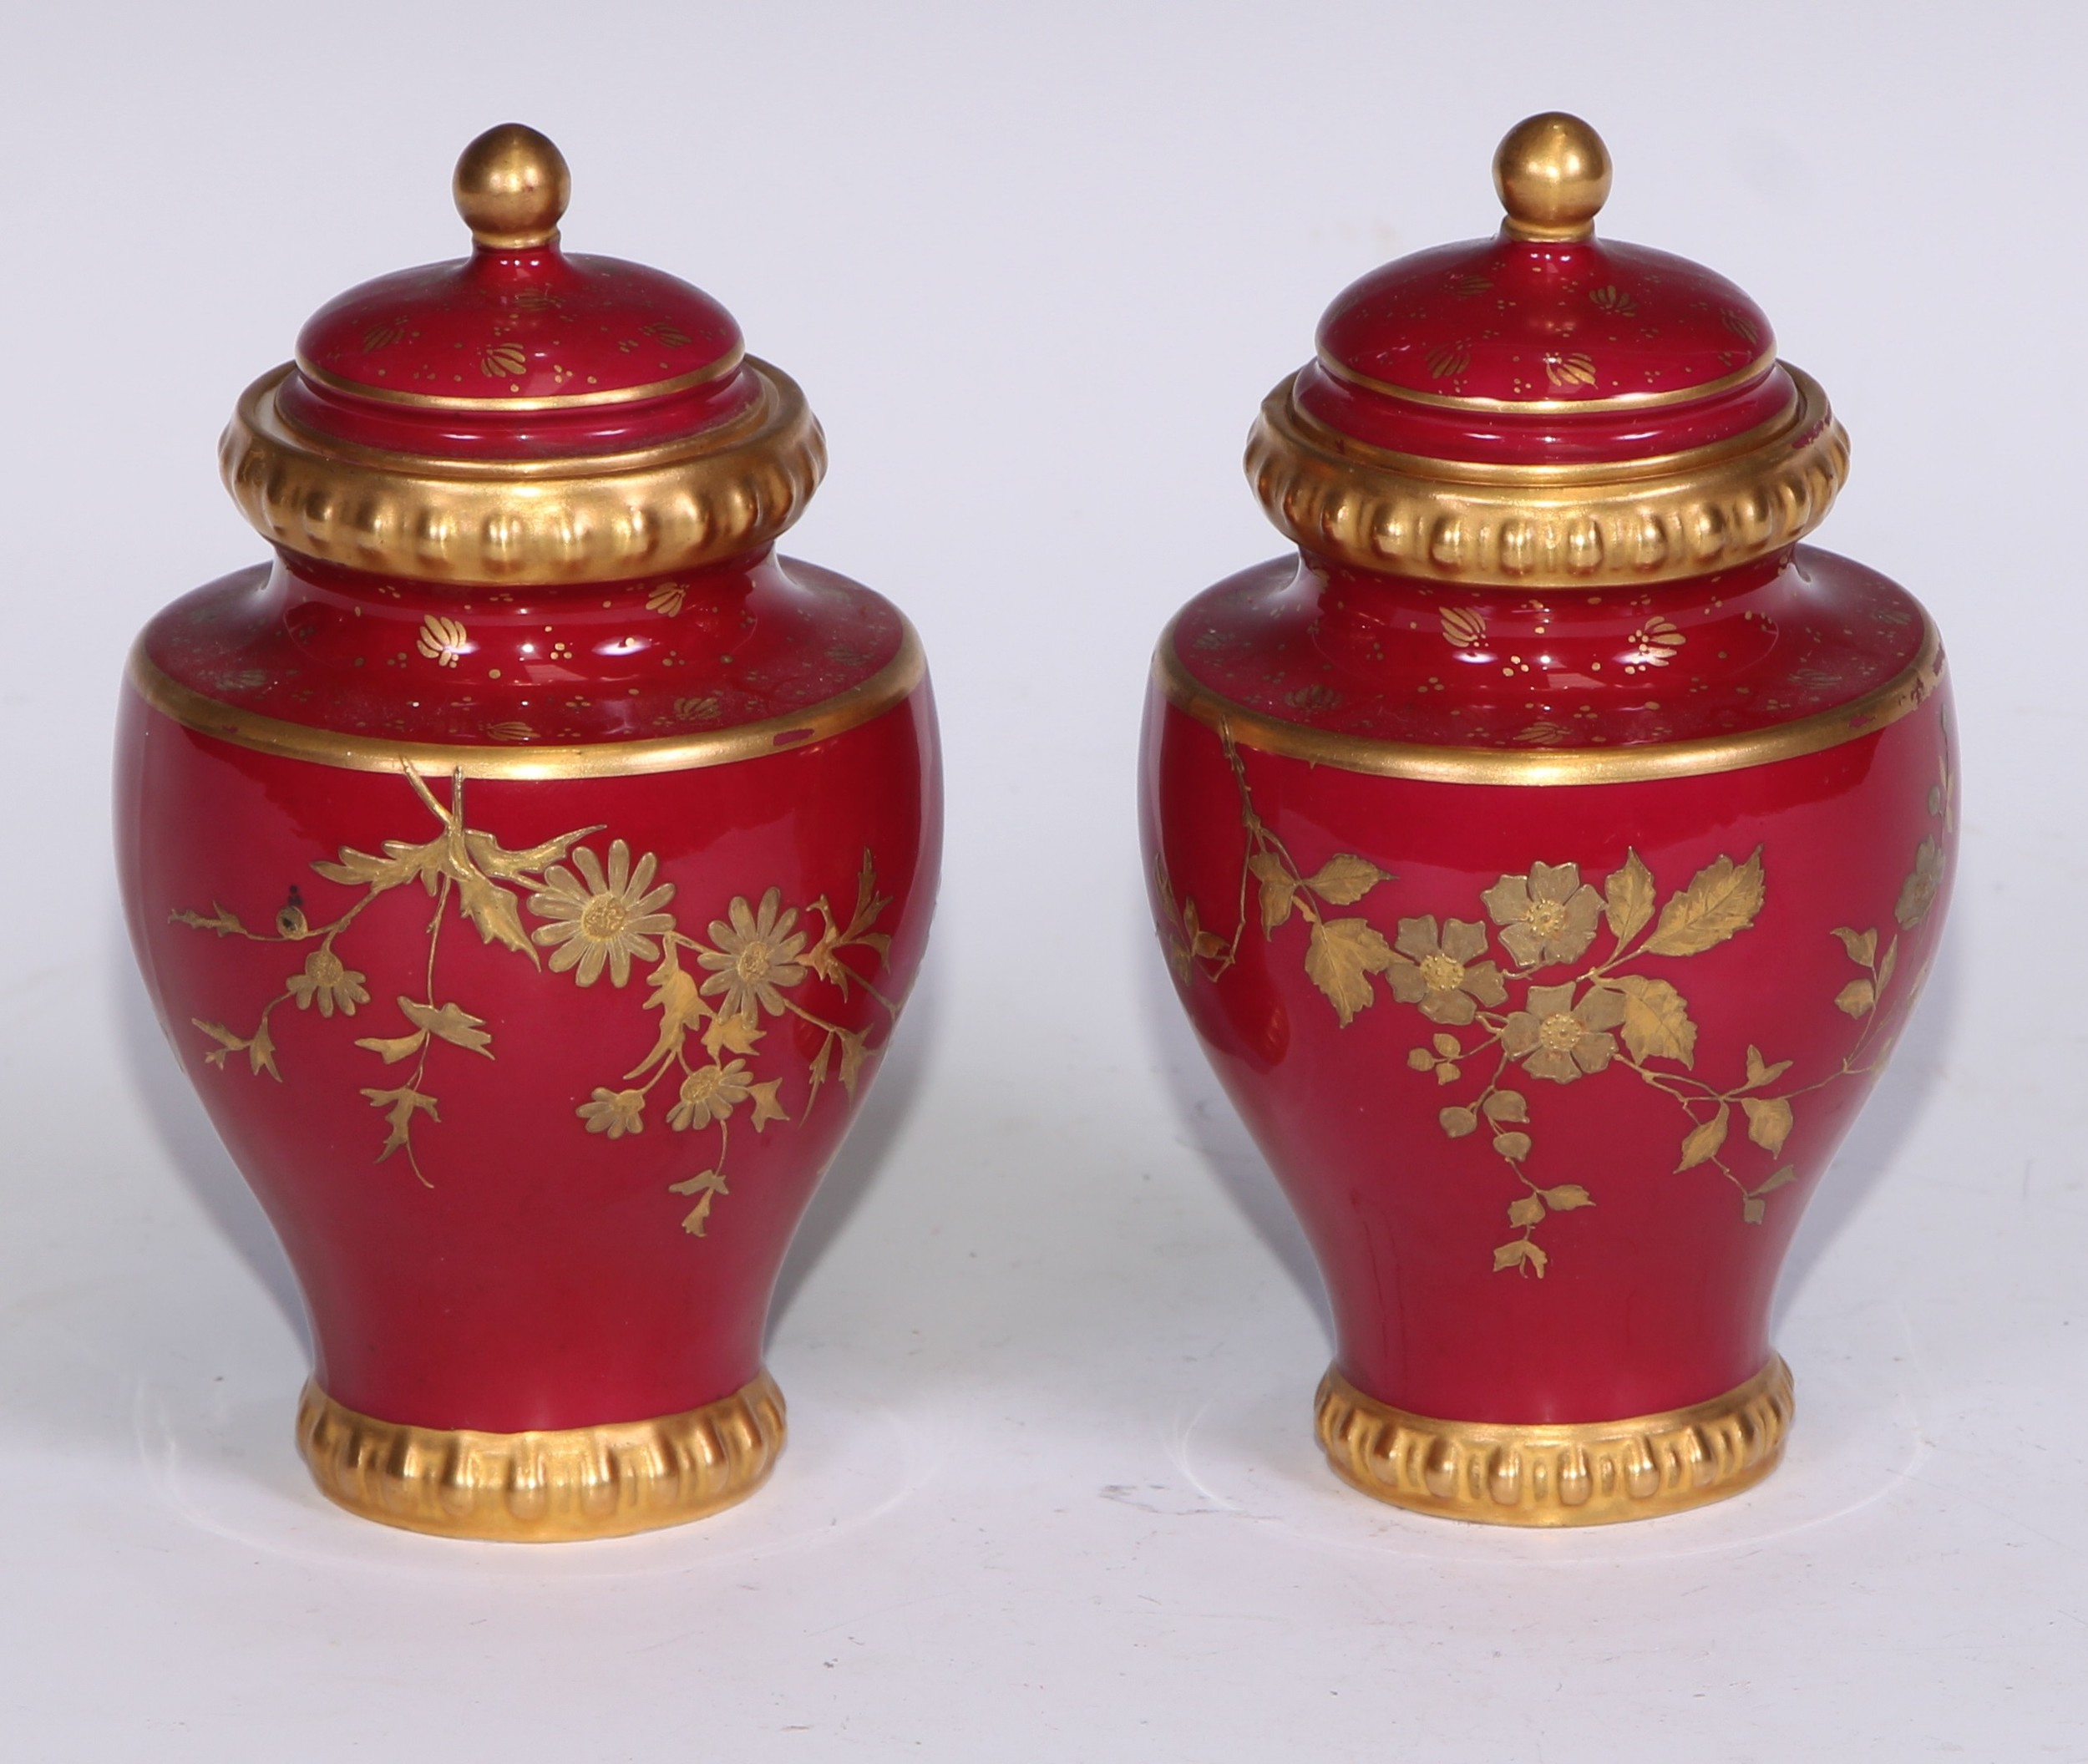 A pair of Royal Crown Derby baluster vases and covers, decorated in gilt with flowers and